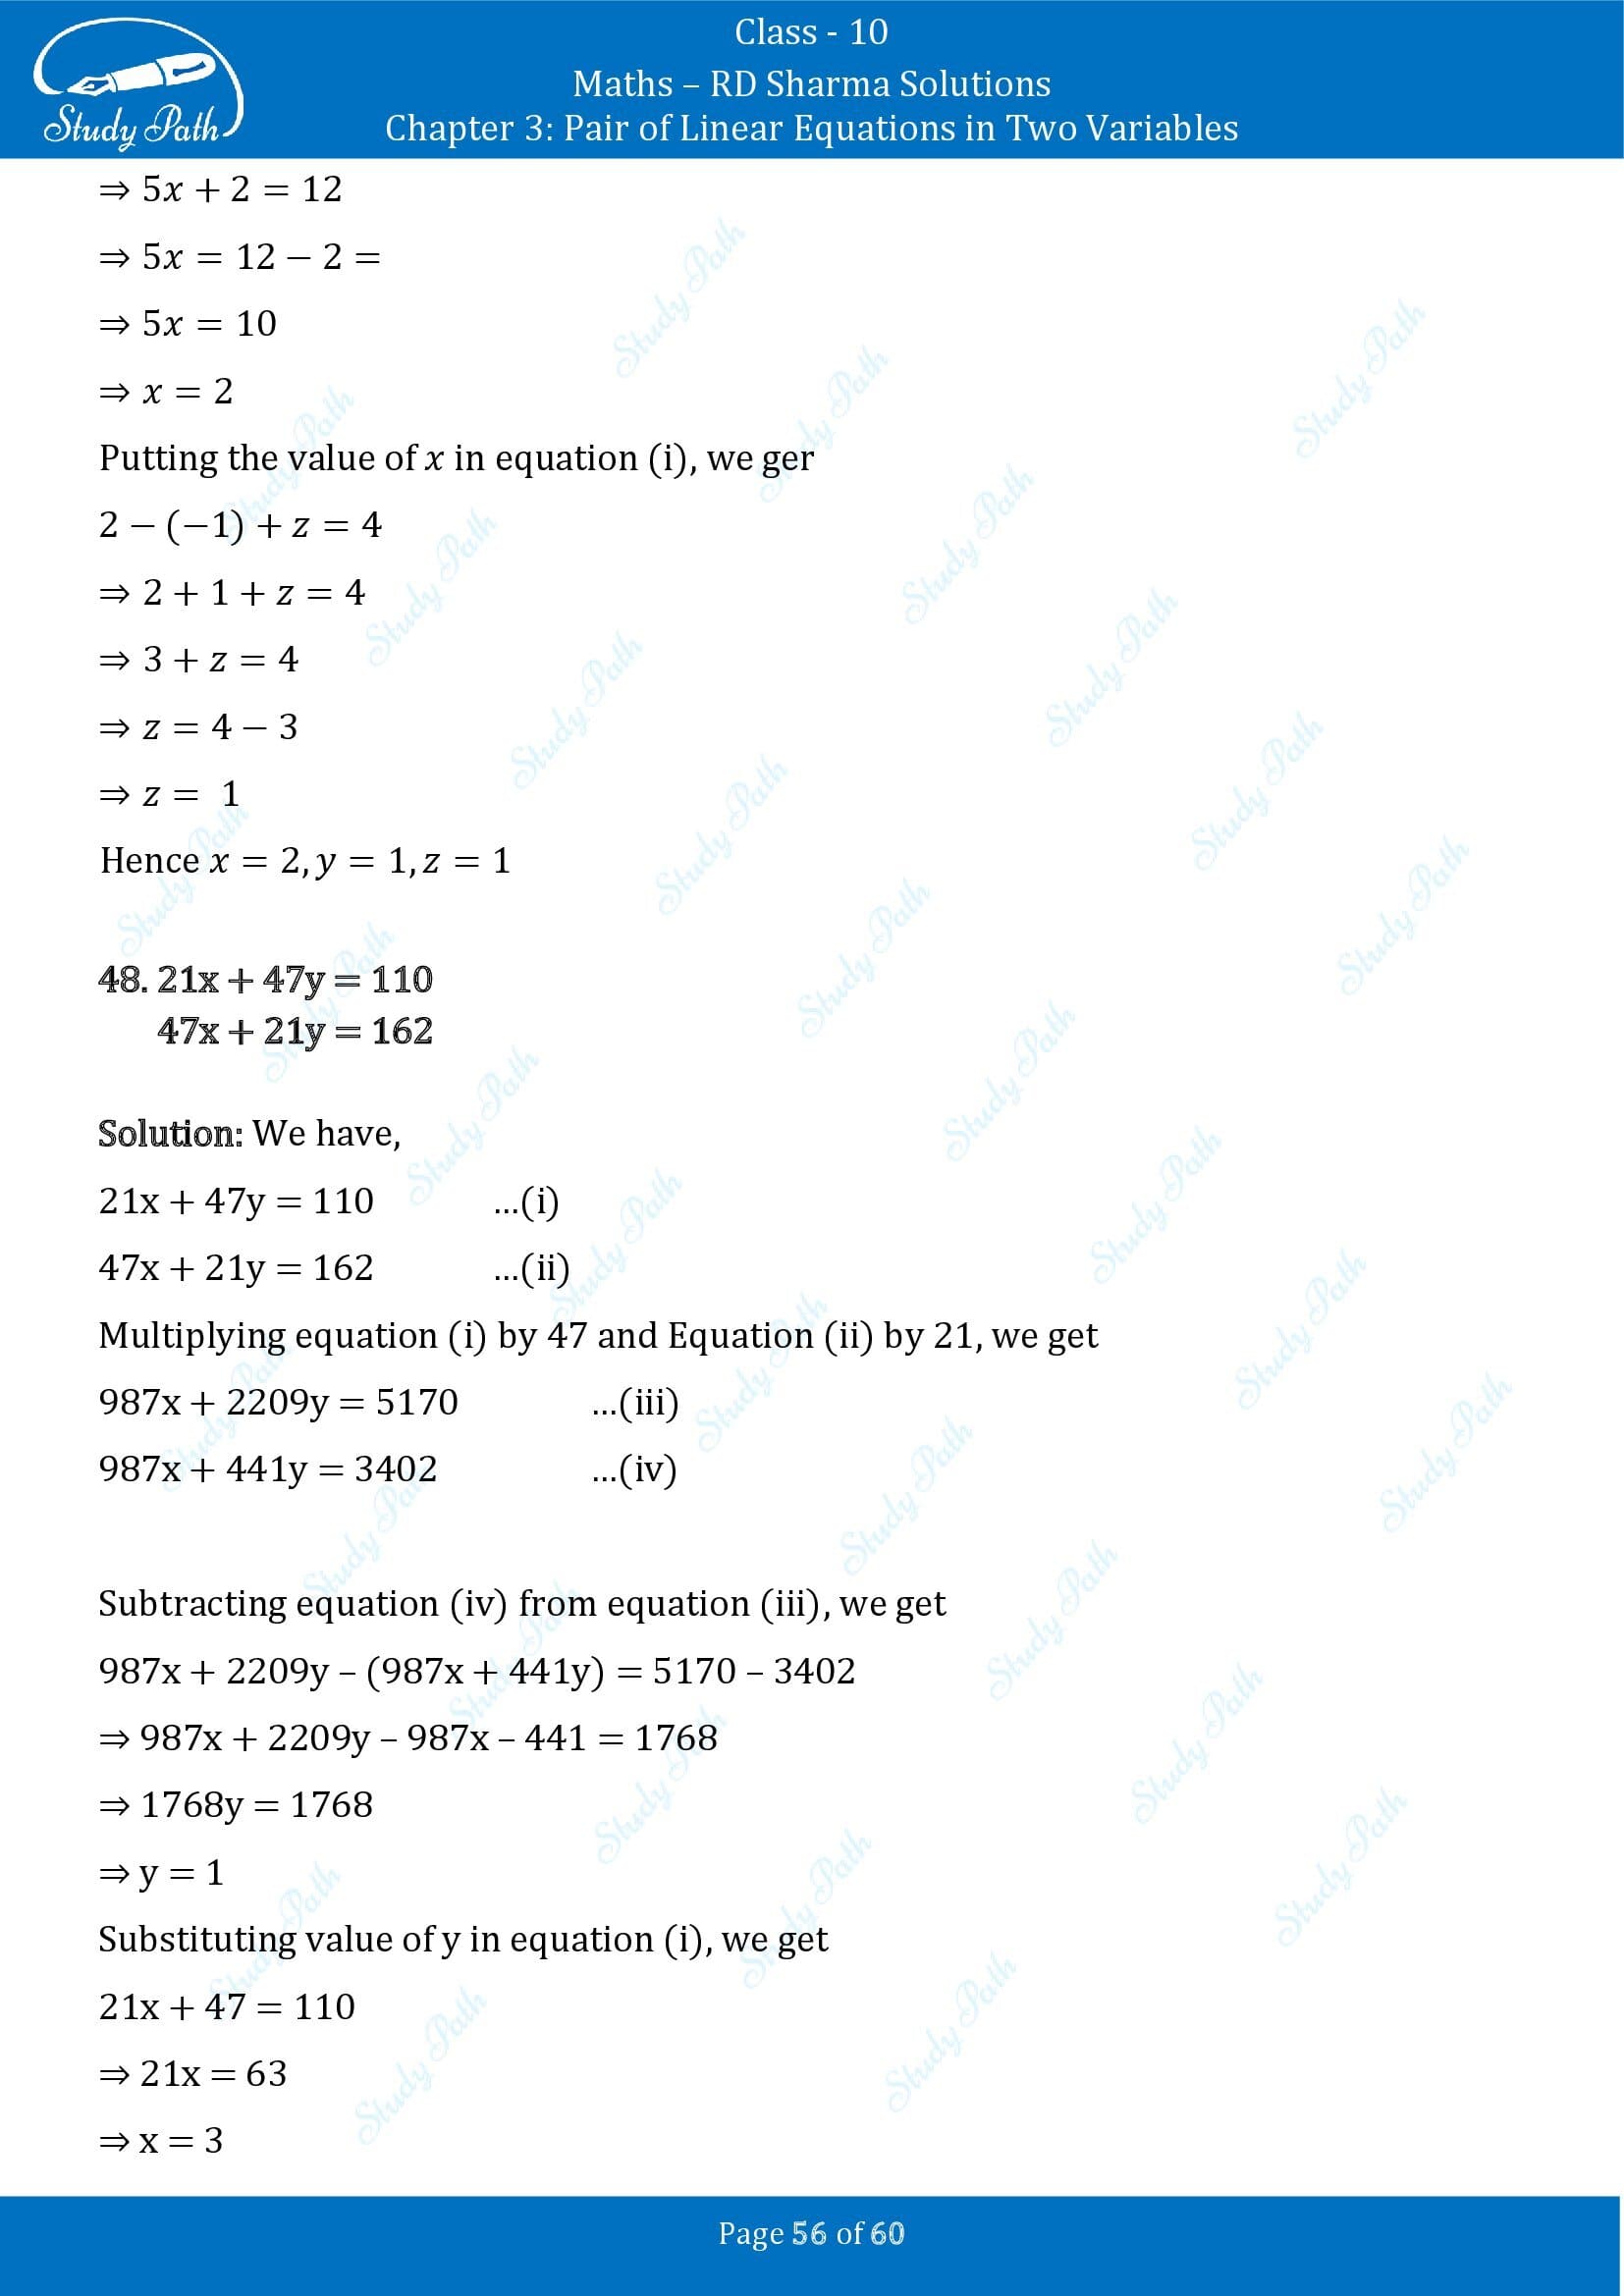 RD Sharma Solutions Class 10 Chapter 3 Pair of Linear Equations in Two Variables Exercise 3.3 00056